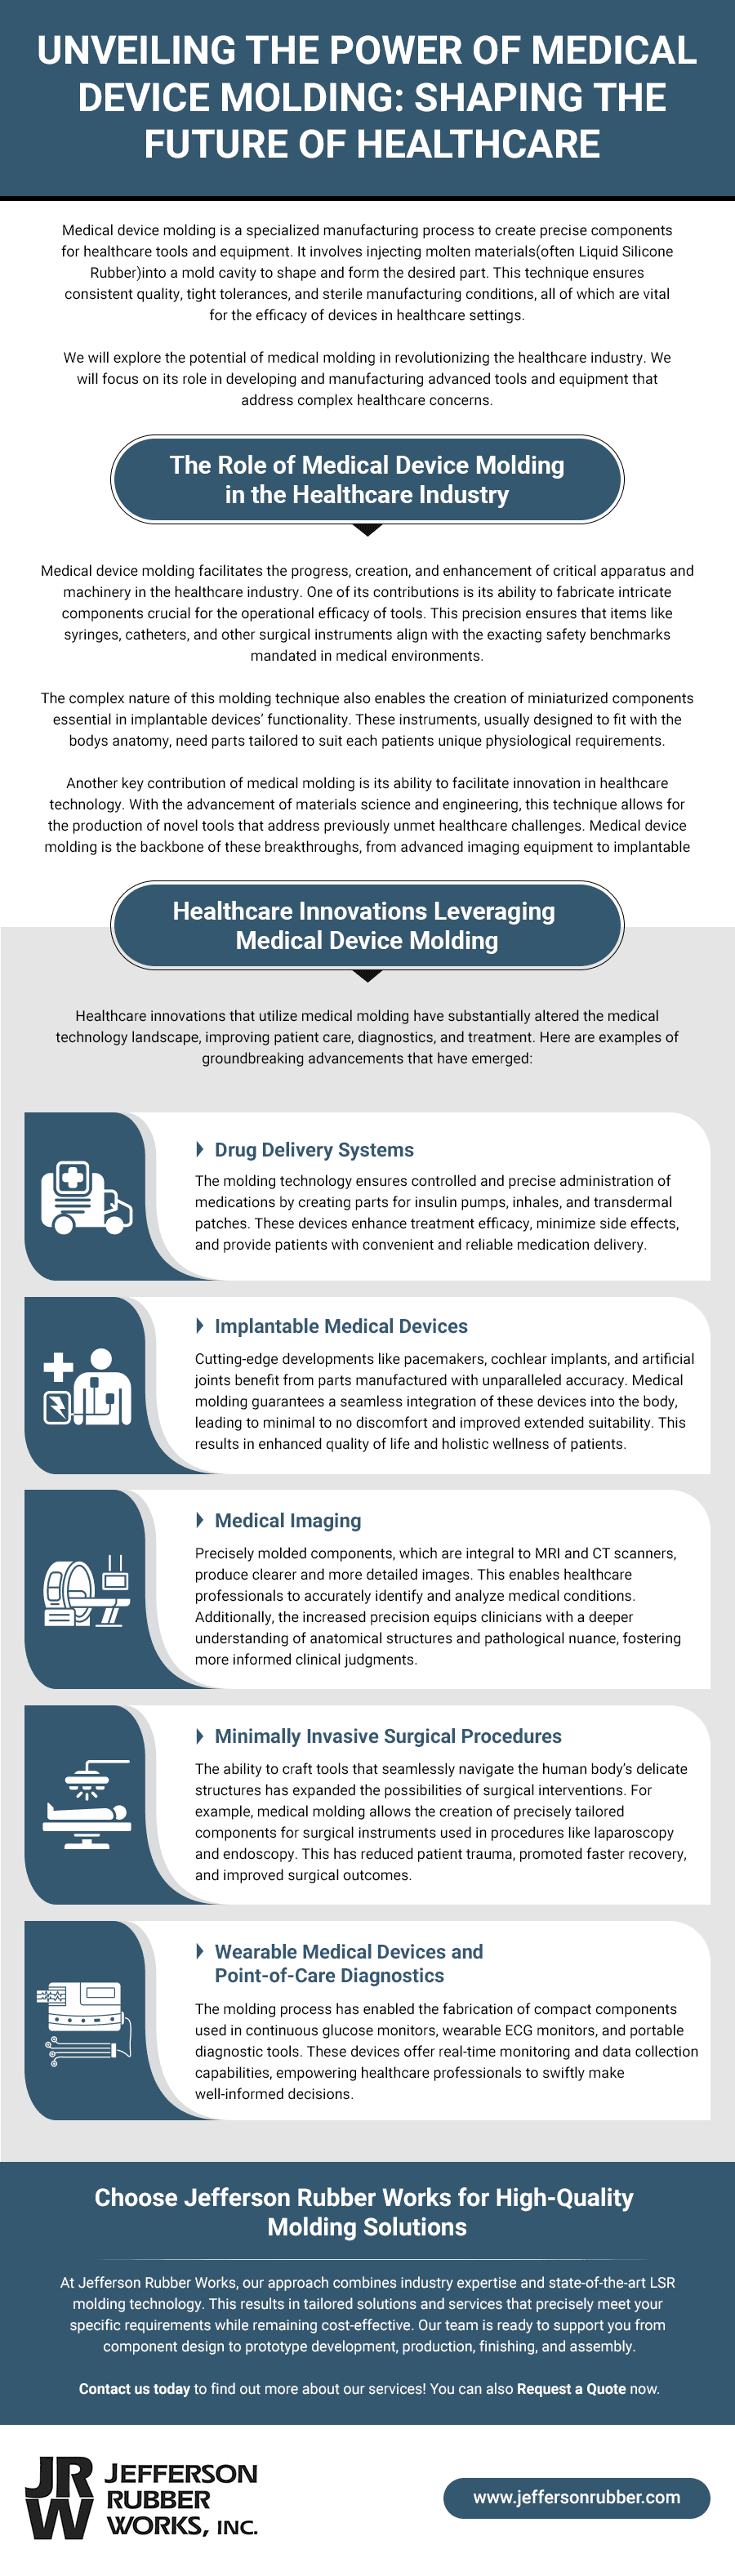 Unveiling the Power of Medical Device Molding: Shaping the Future of Healthcare